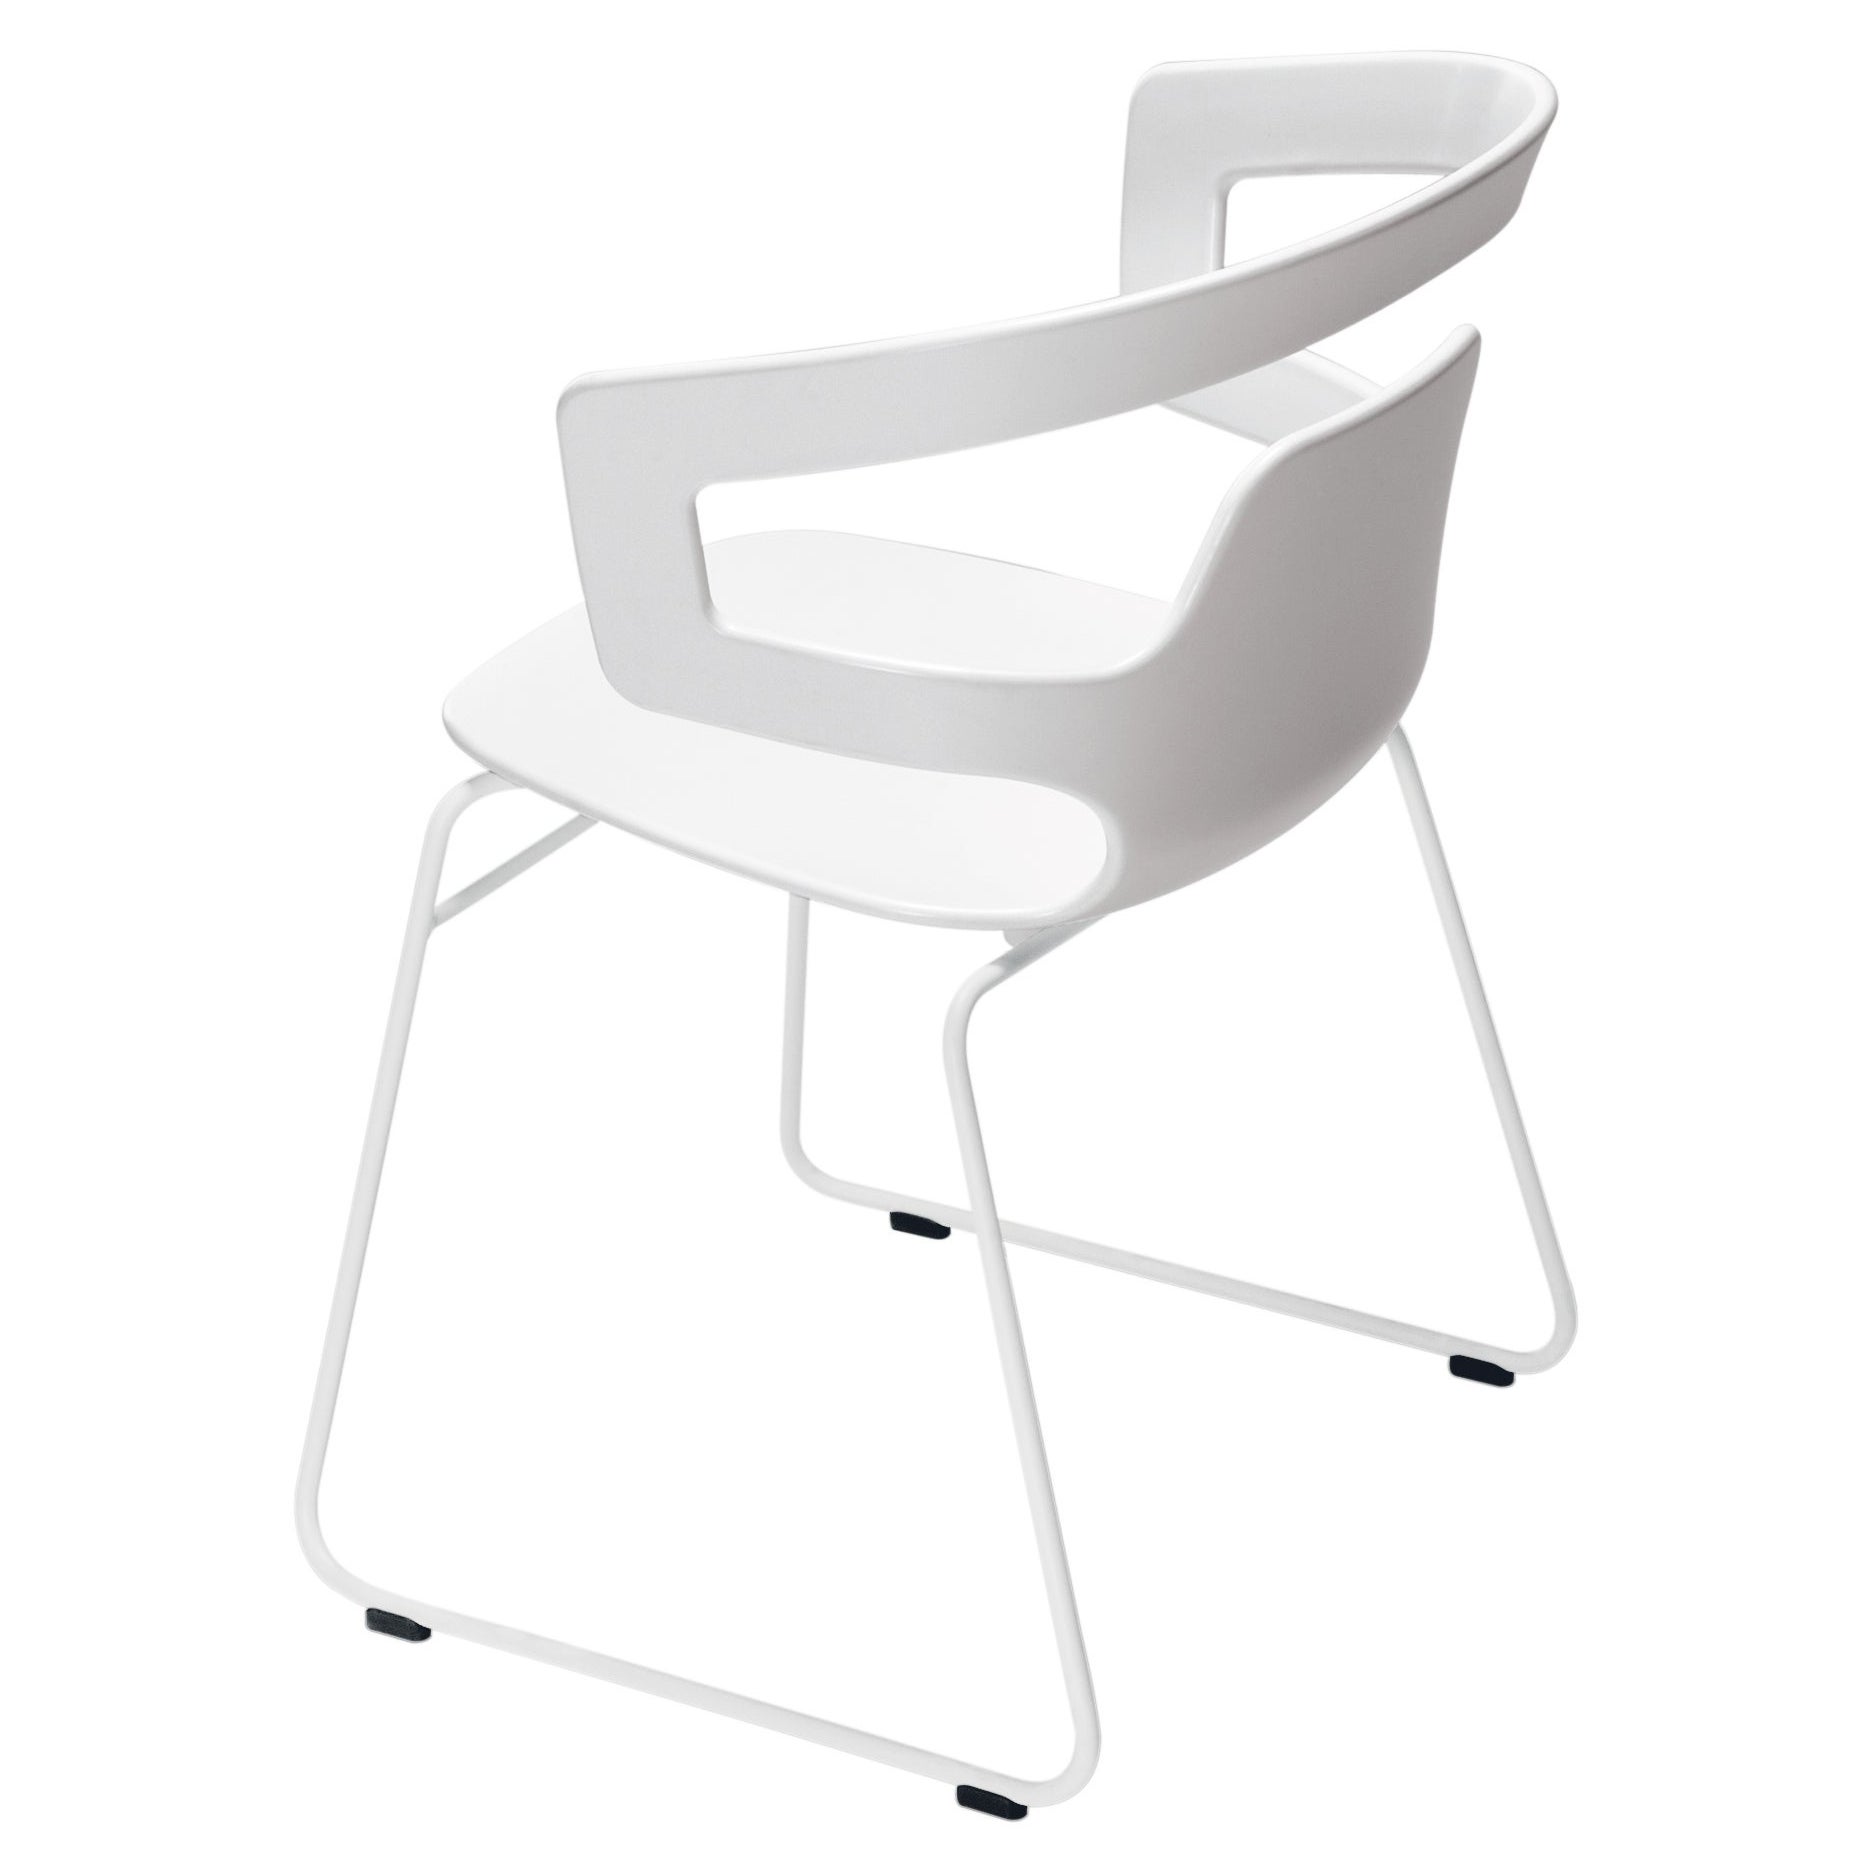 Alias 501 Segesta Sledge Chair in White Lacquered Steel Frame by Alfredo Häberli For Sale